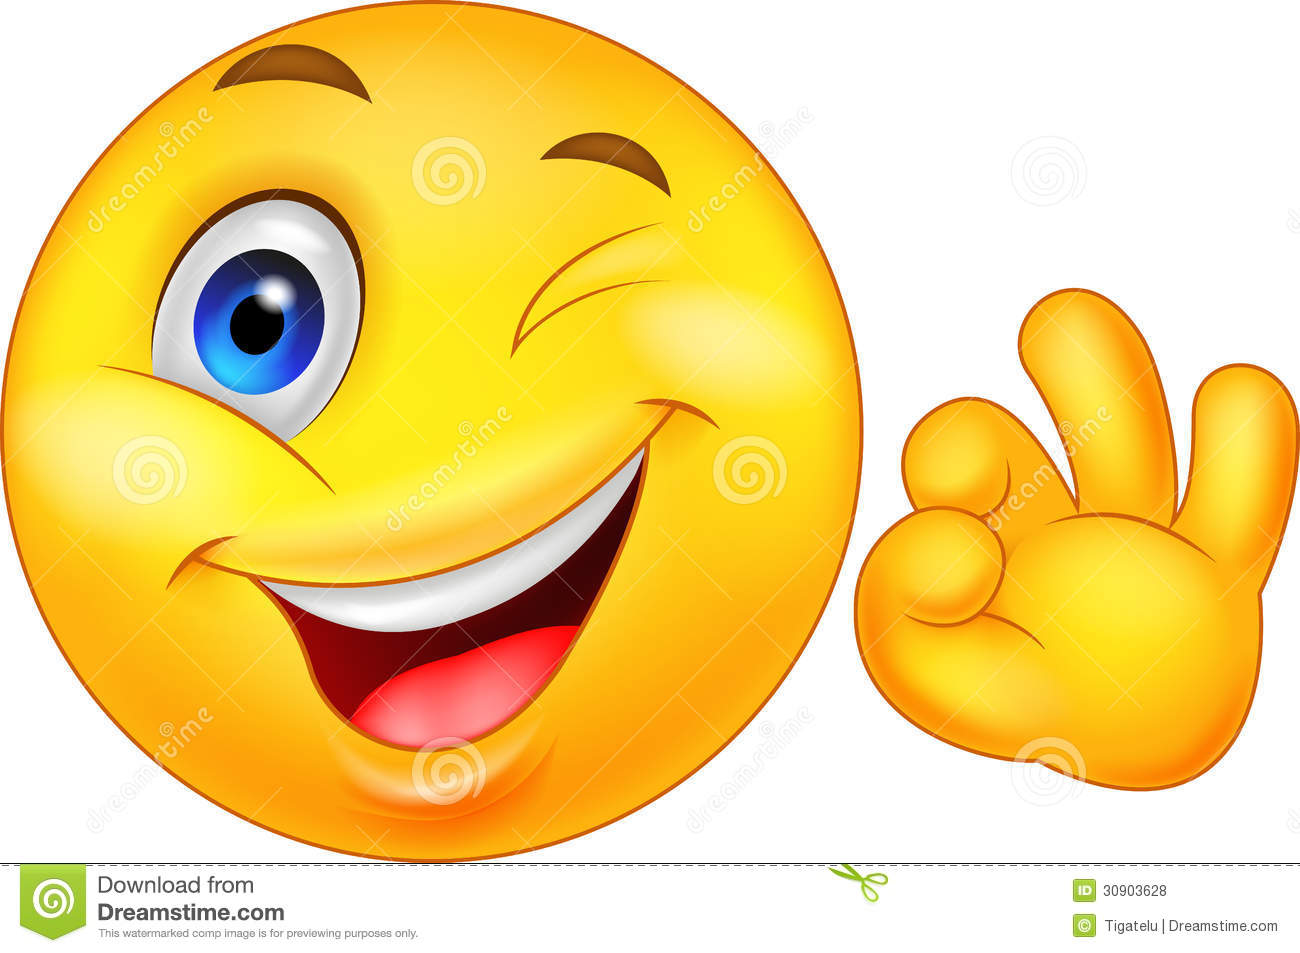 Smiley Emoticon With Ok Sign Royalty Free Stock Photos   Image    